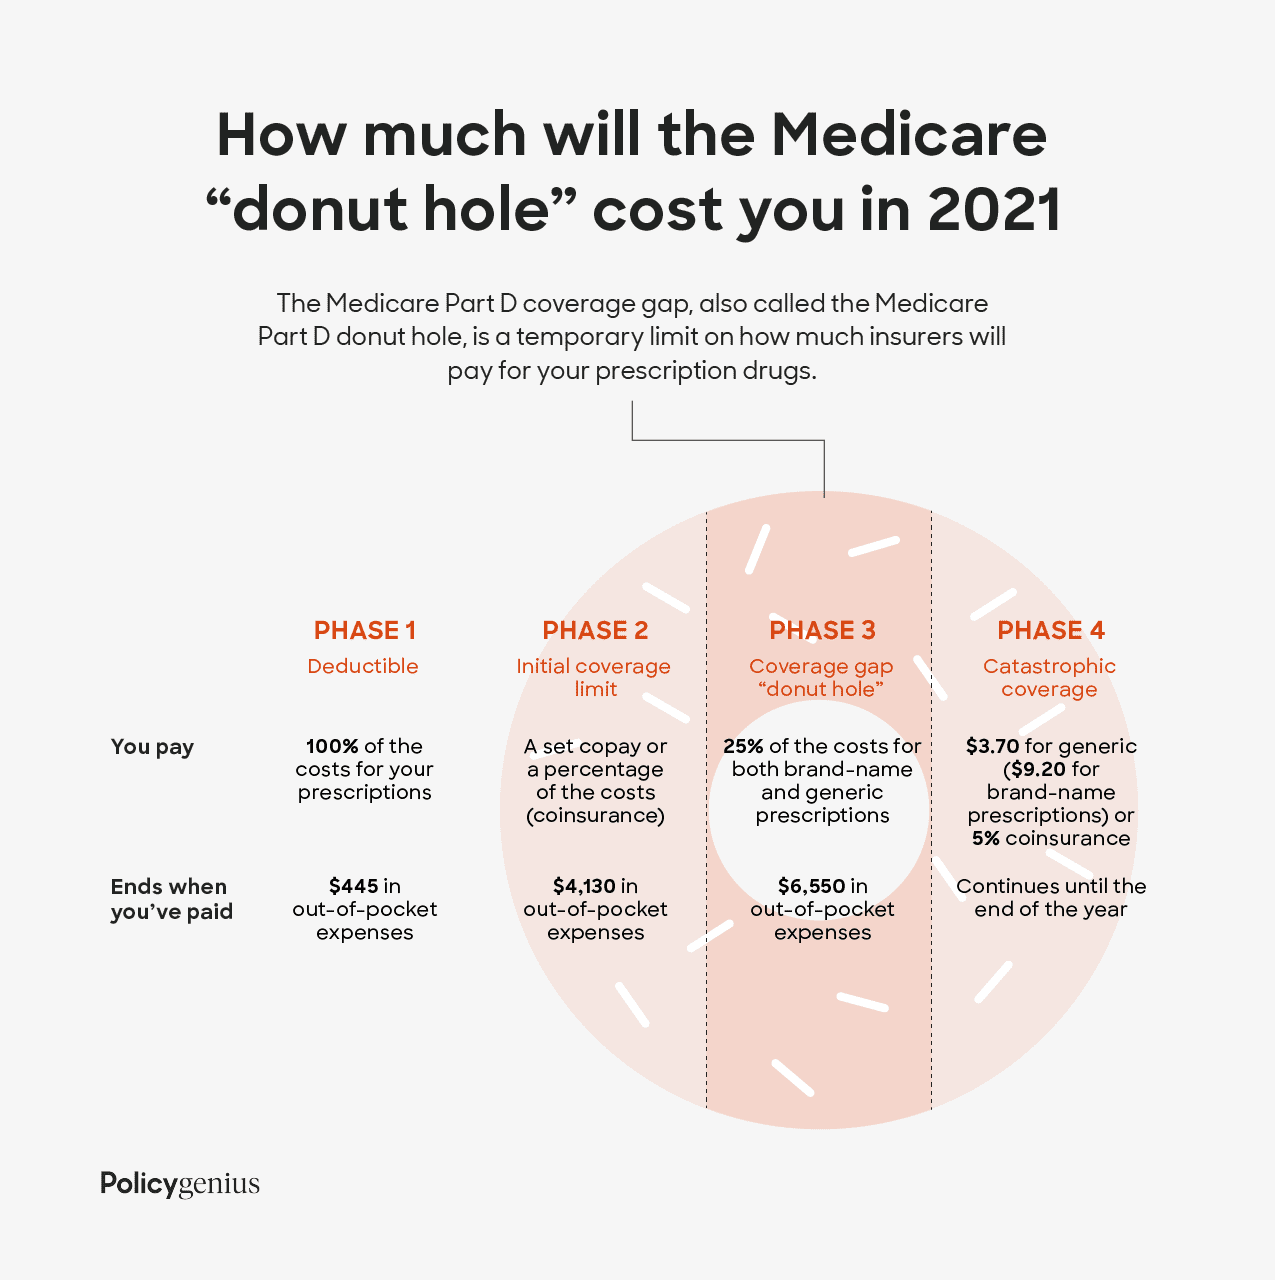 Chart showing how much will the Medicare “donut hole” can cost you in 2021